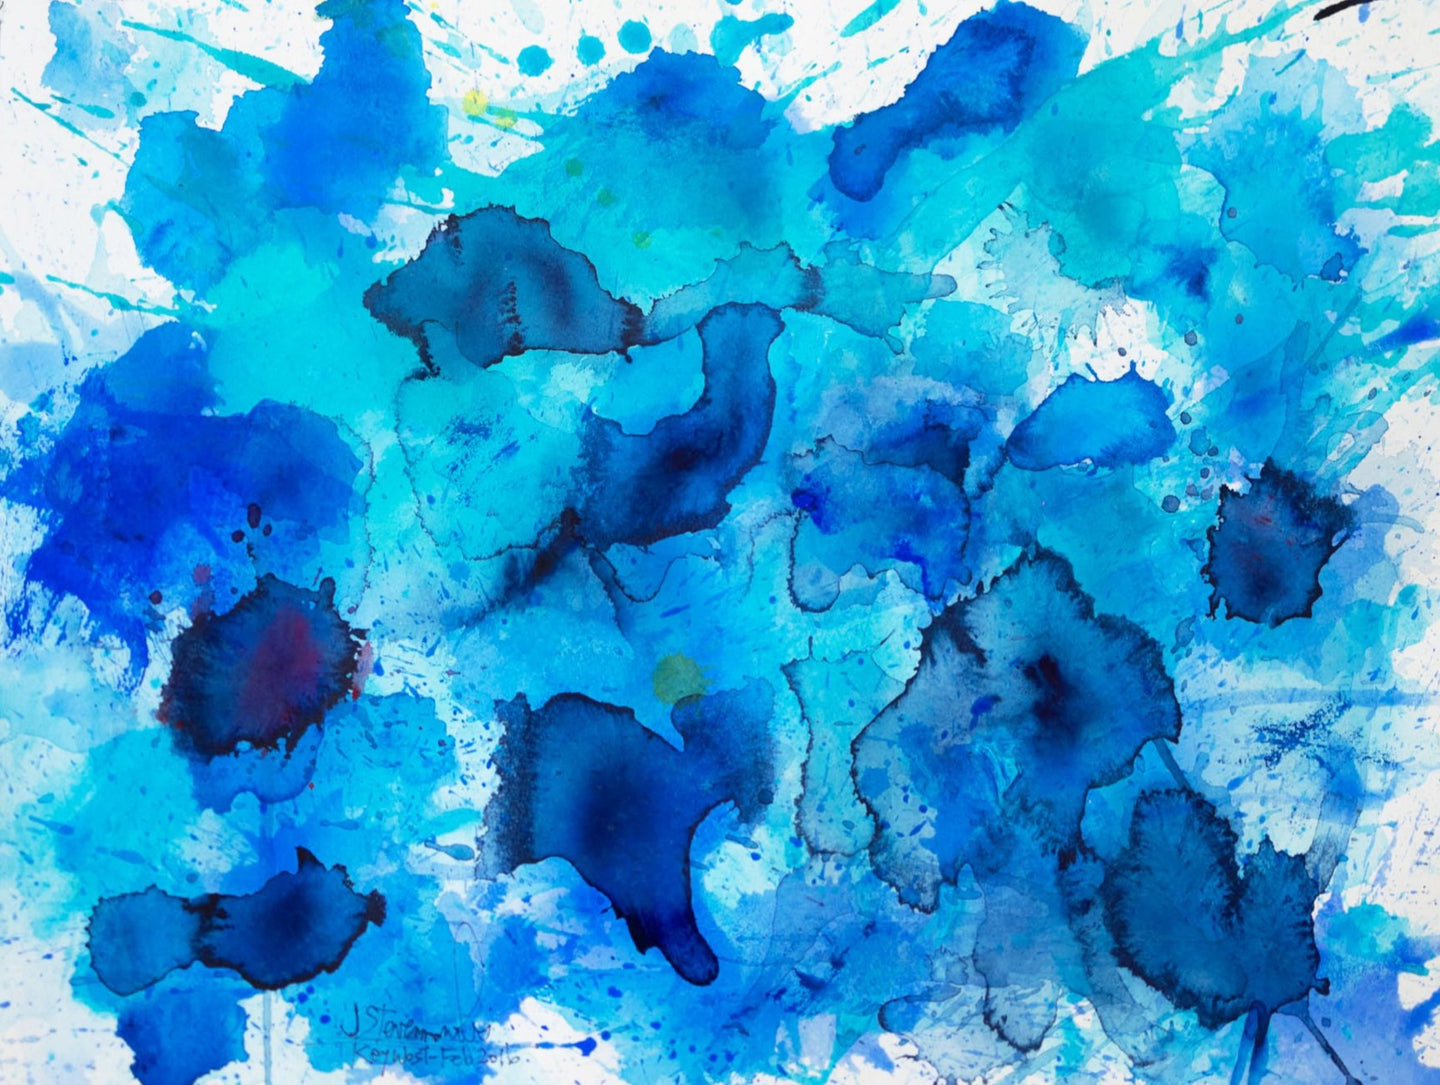 J. Steven Manolis, Splash (Key West), 12.18.14, 2016, Watercolor and Acrylic on paper, 12 x 18 inches, Blue abstract expressionism watercolor art